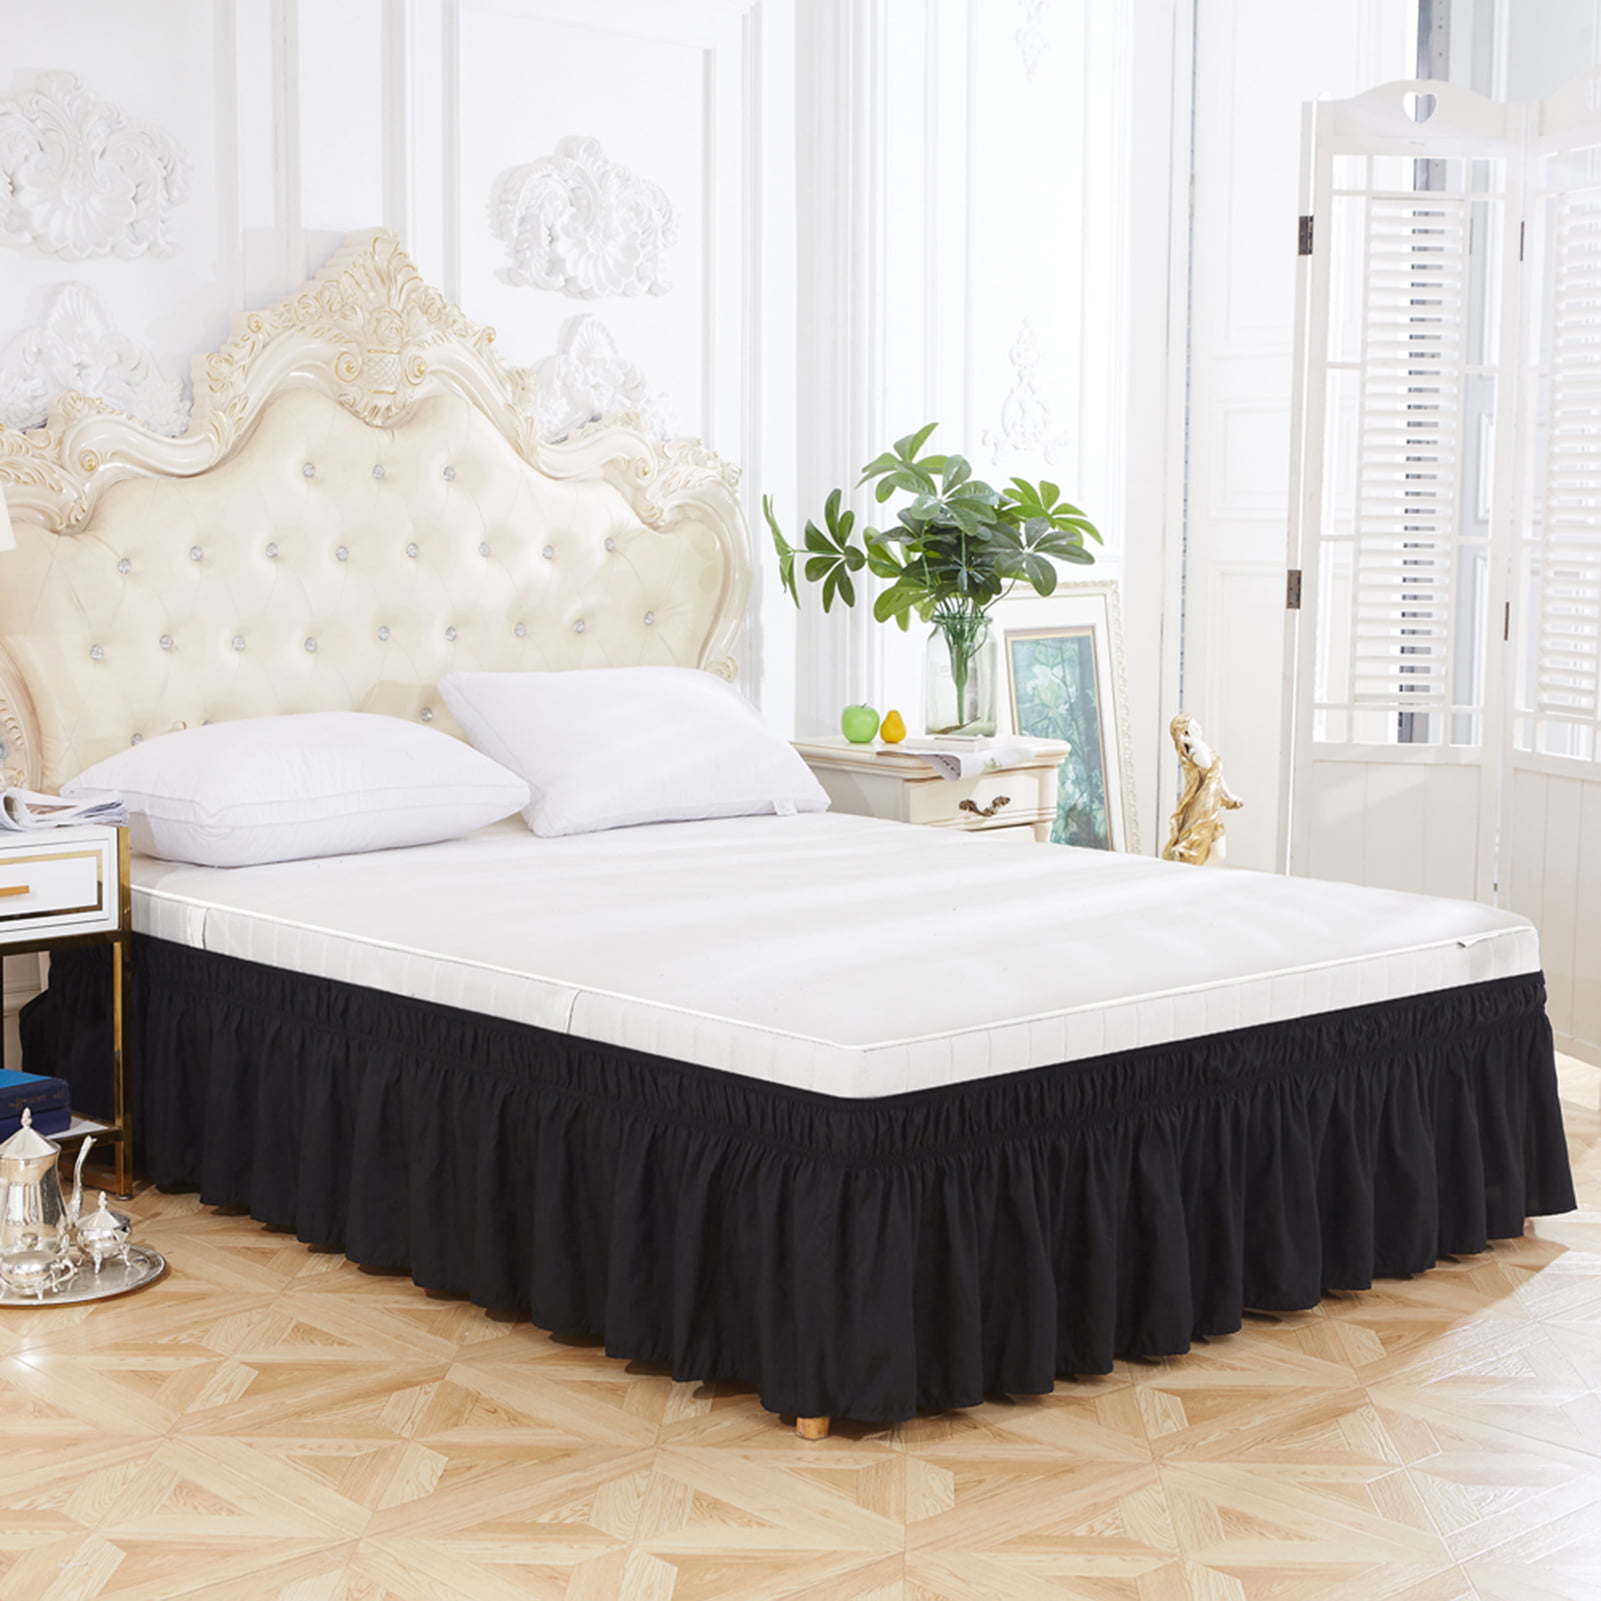 Details about   15 in Elastic Bed Skirt Ruffle Easy Fit Wrap Around Twin Full Queen Size US 